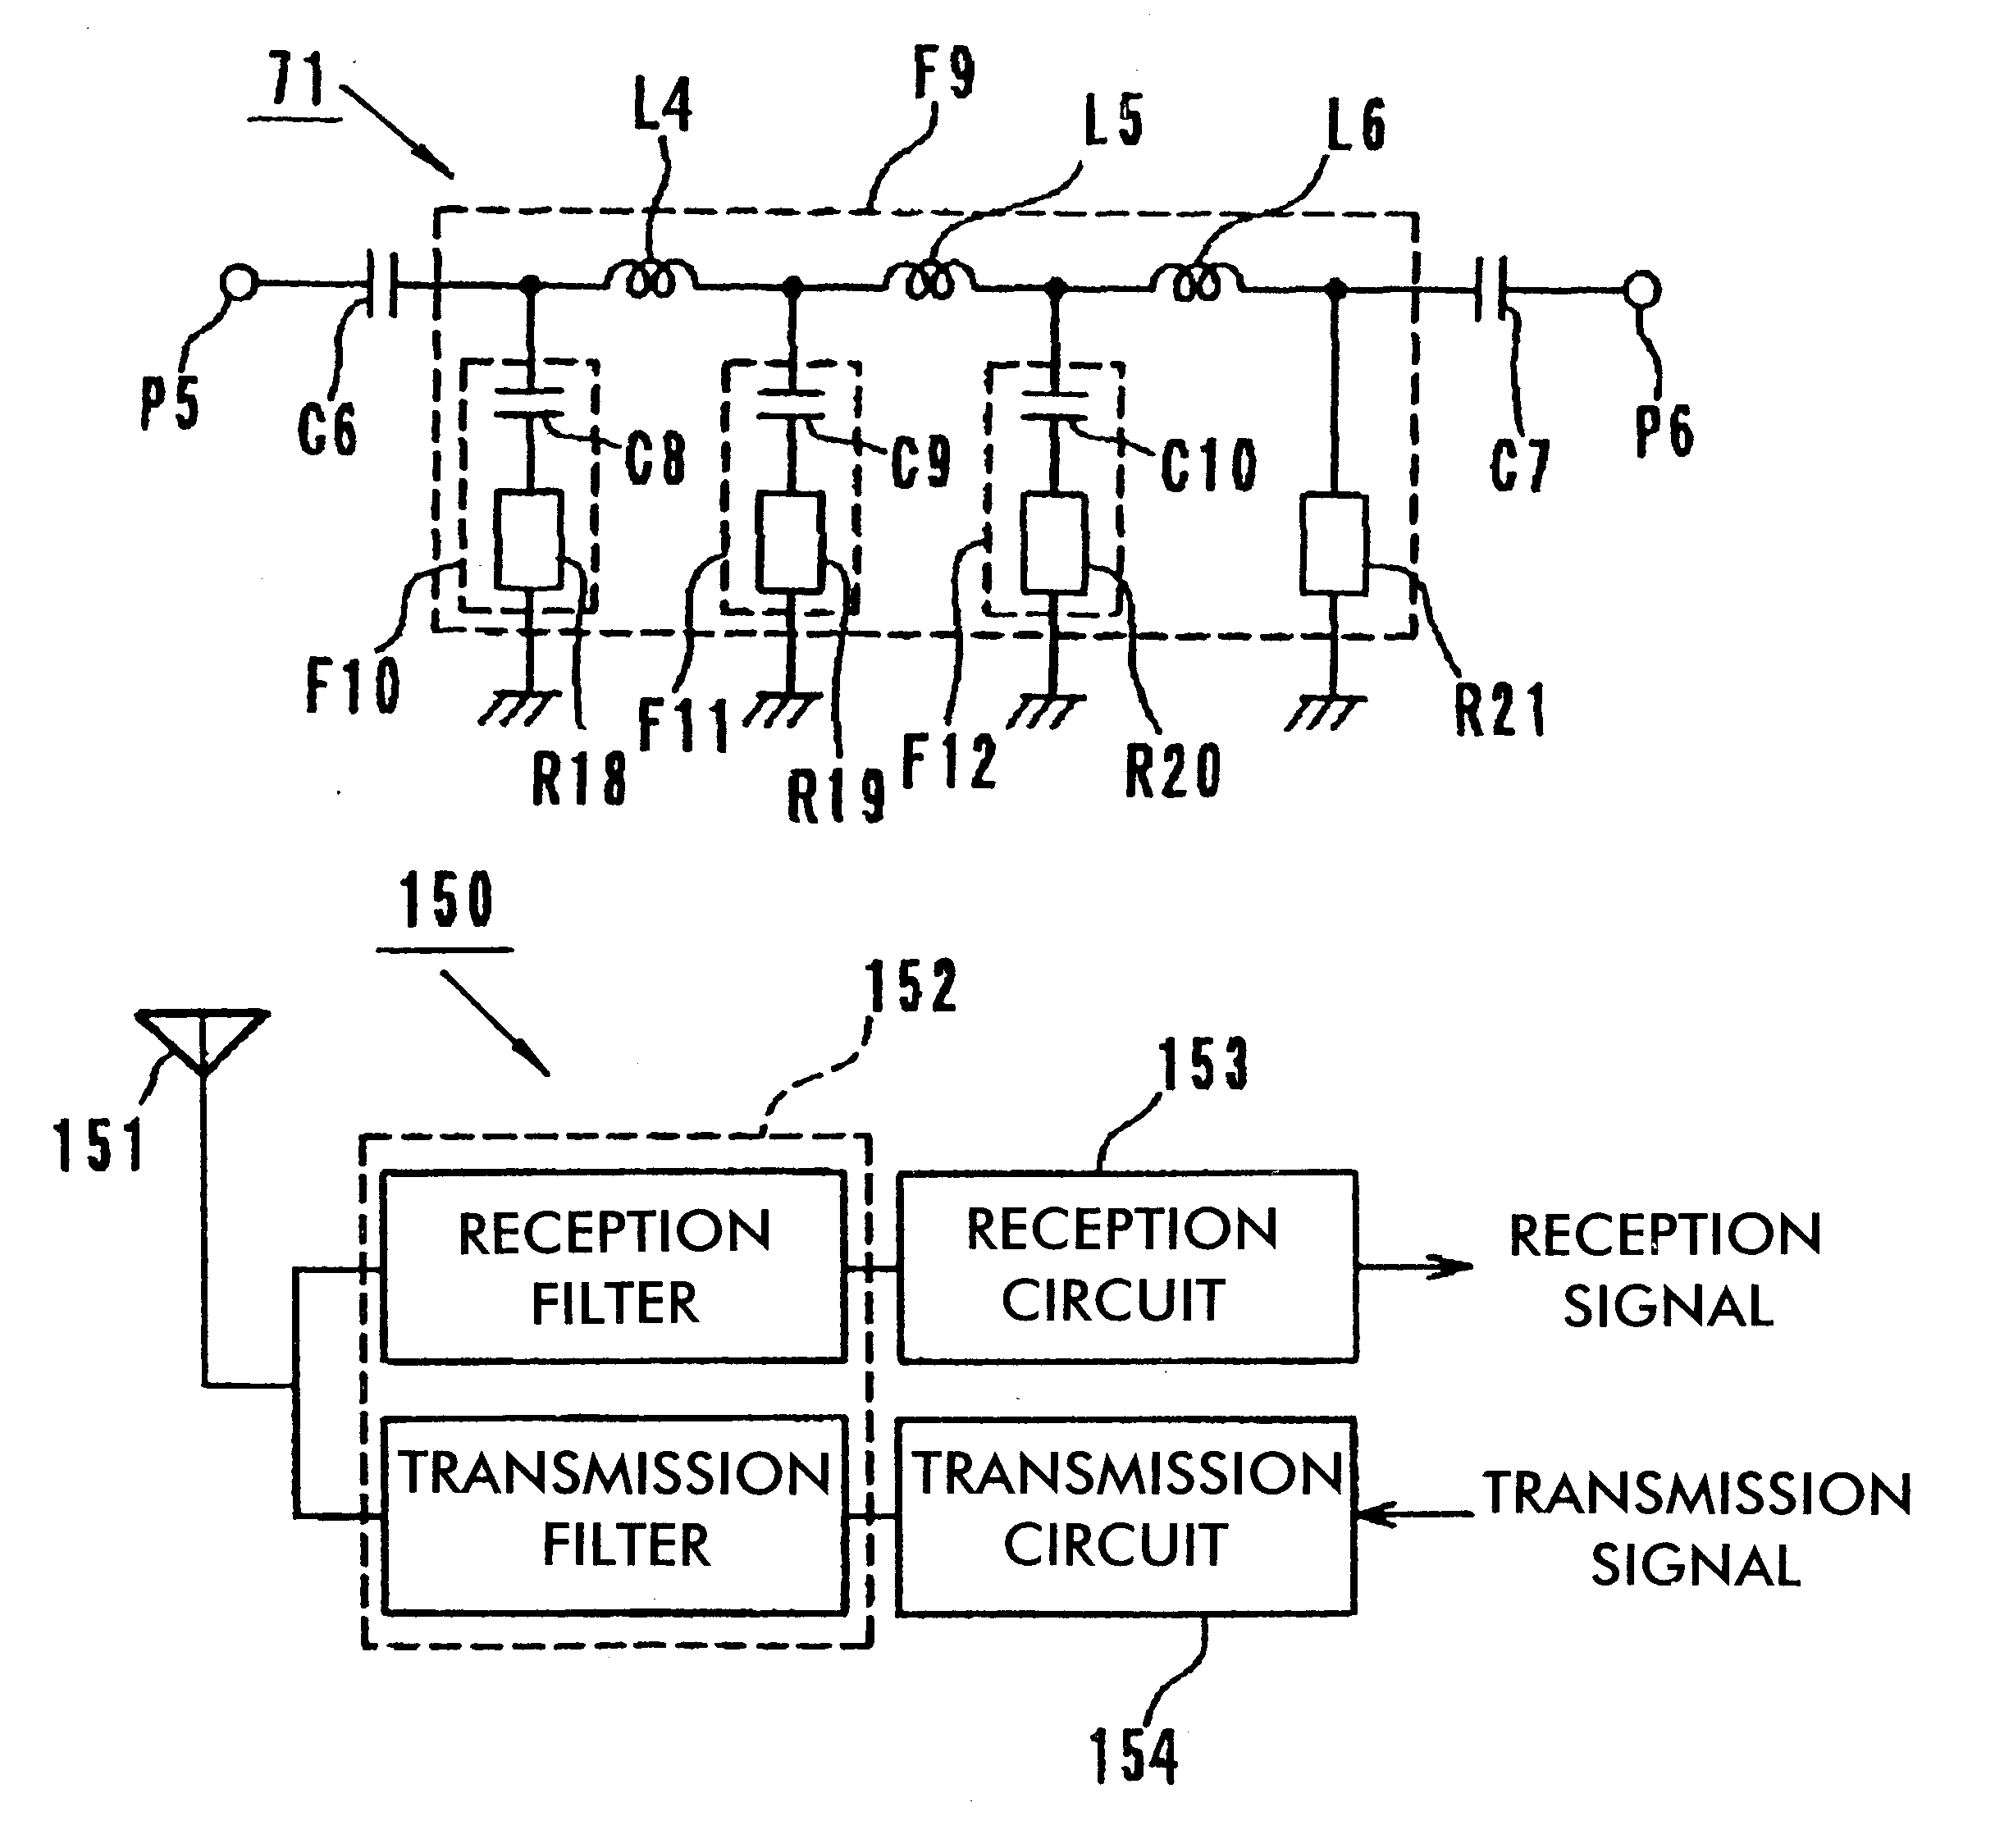 Filter unit comprising a wideband bandpass filter and one band-elimination filter